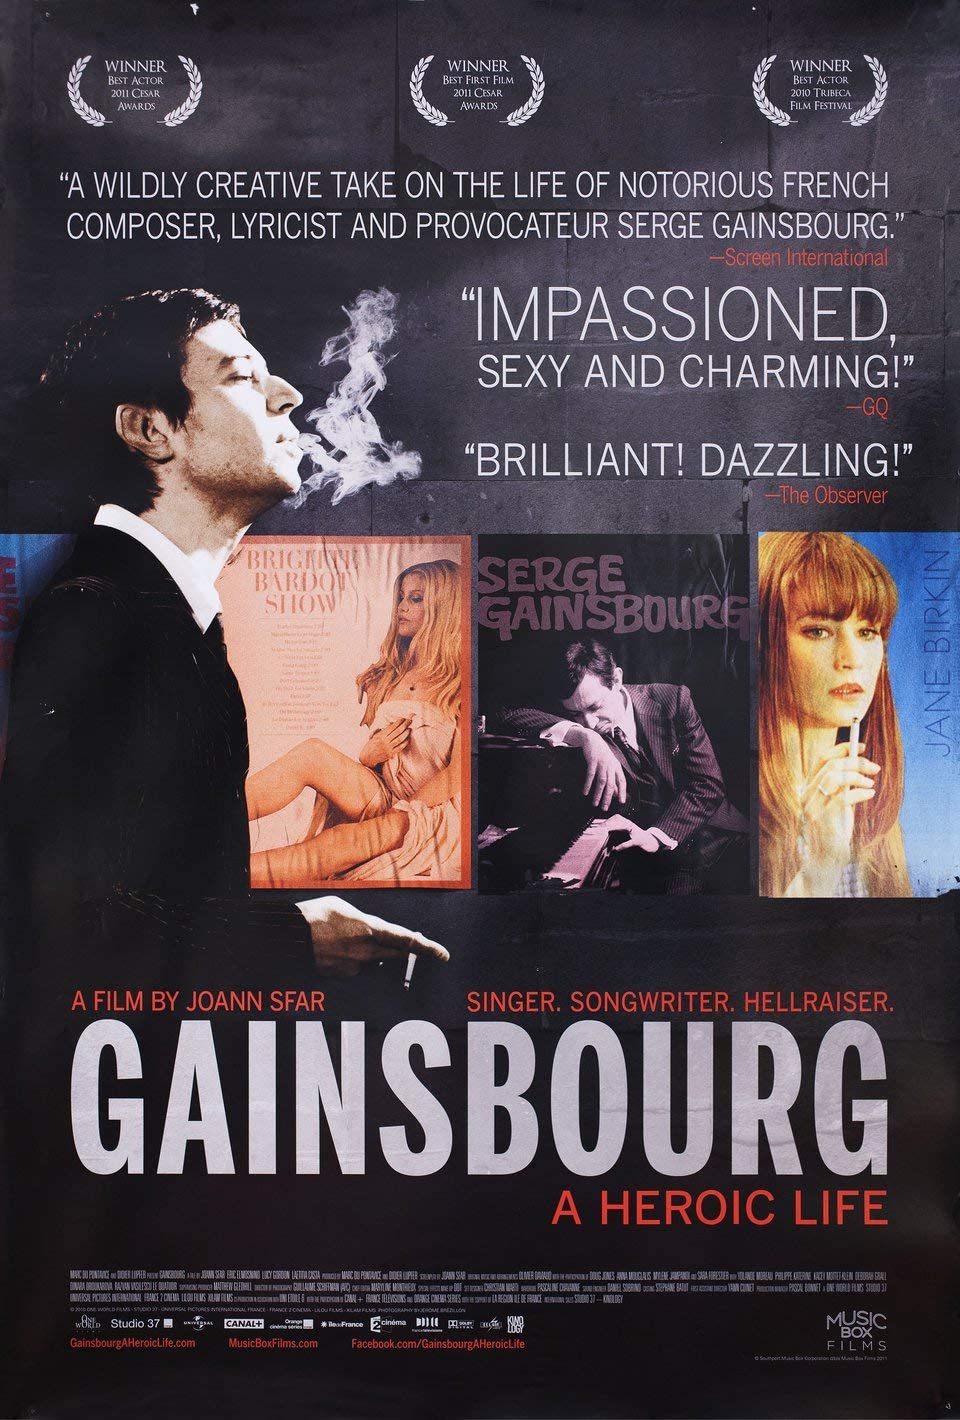 GAINSBOURG: A HEROIC LIFE